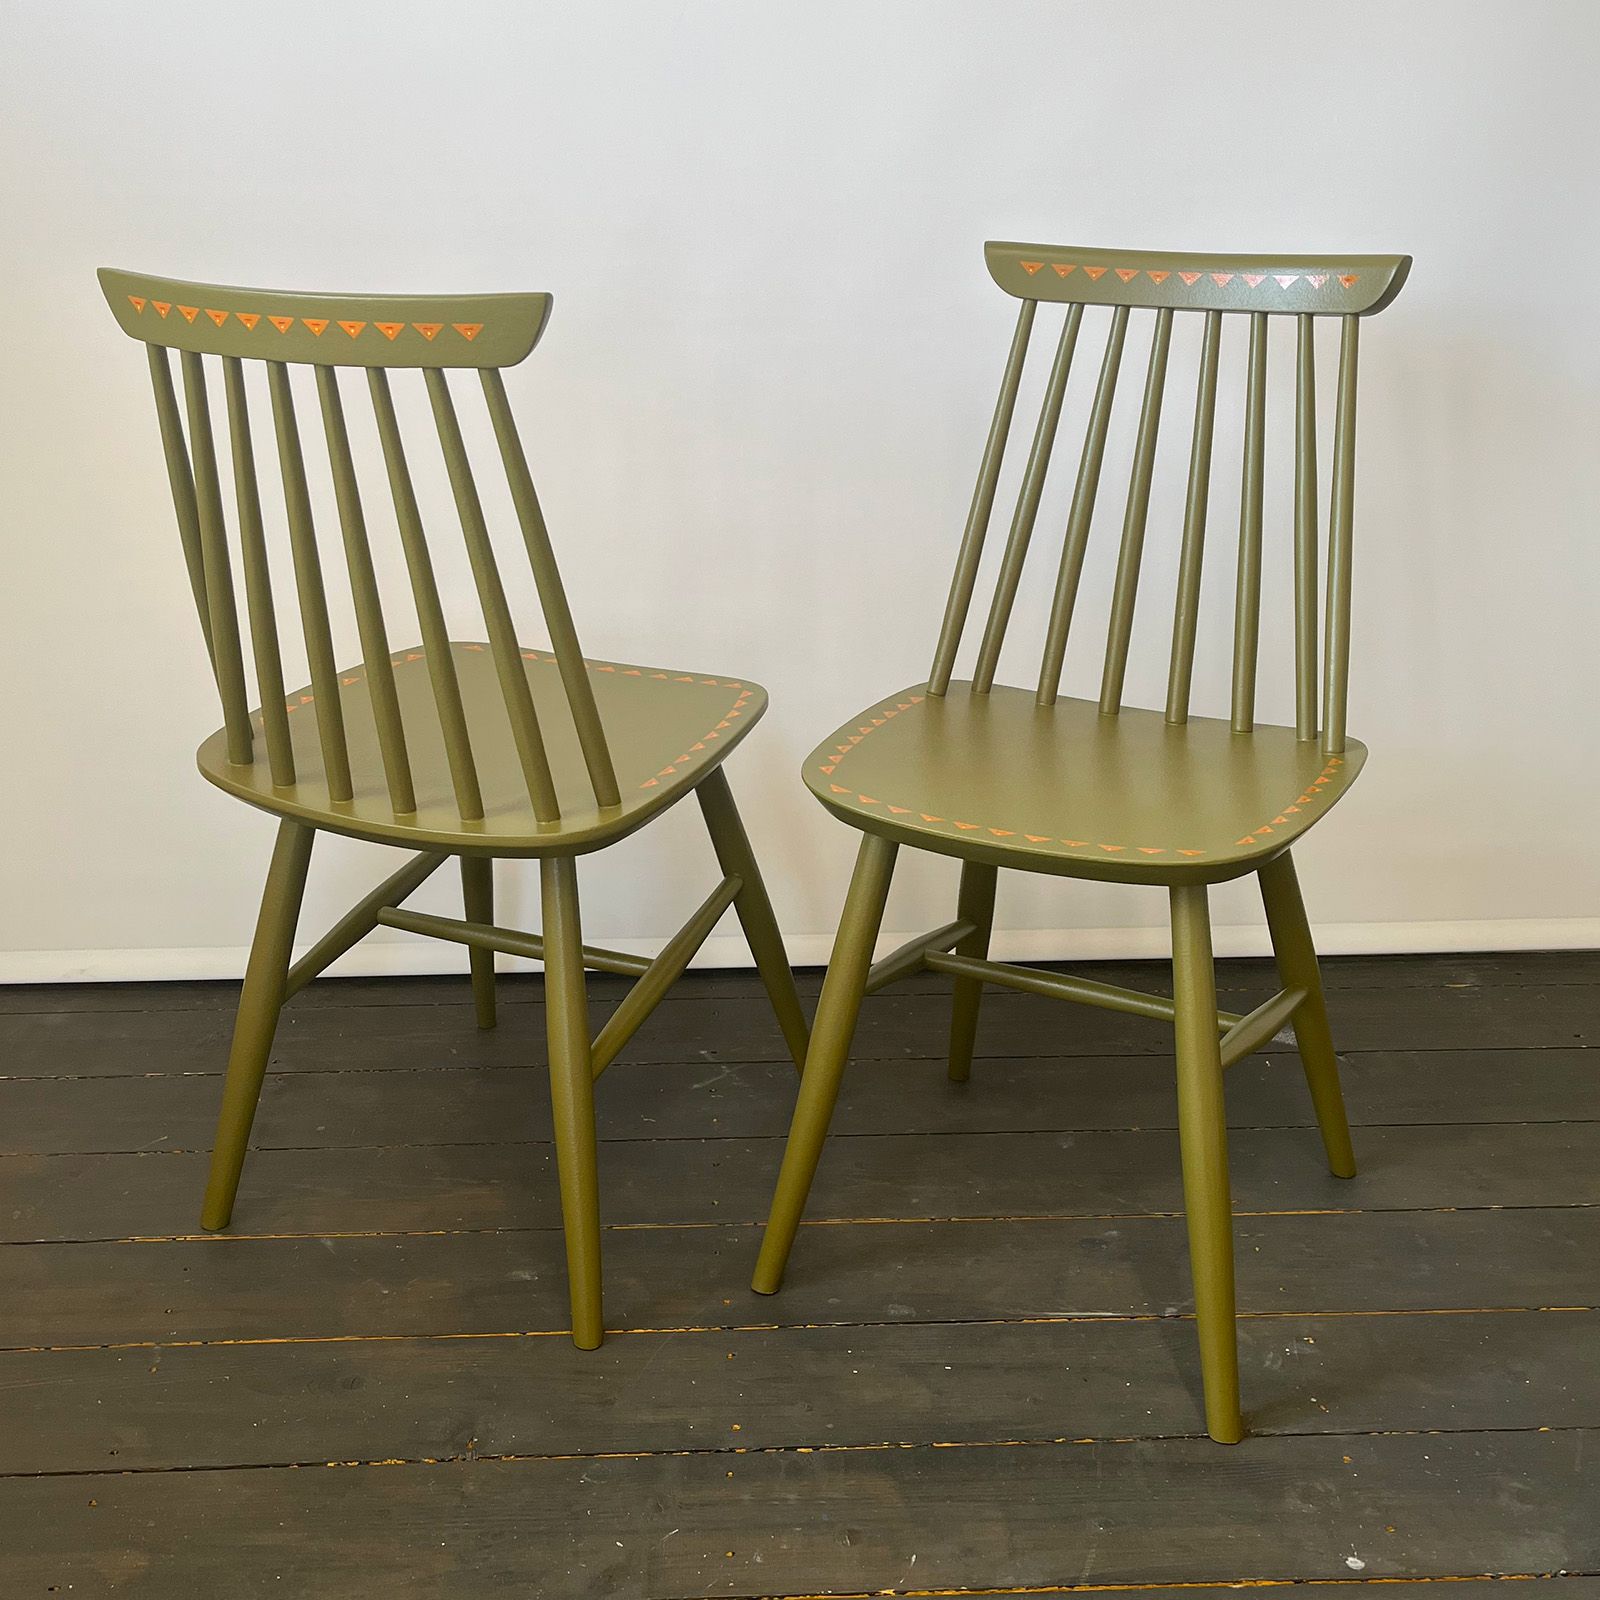 Olive Spindle Chairs by Helen Bateman Upcycled